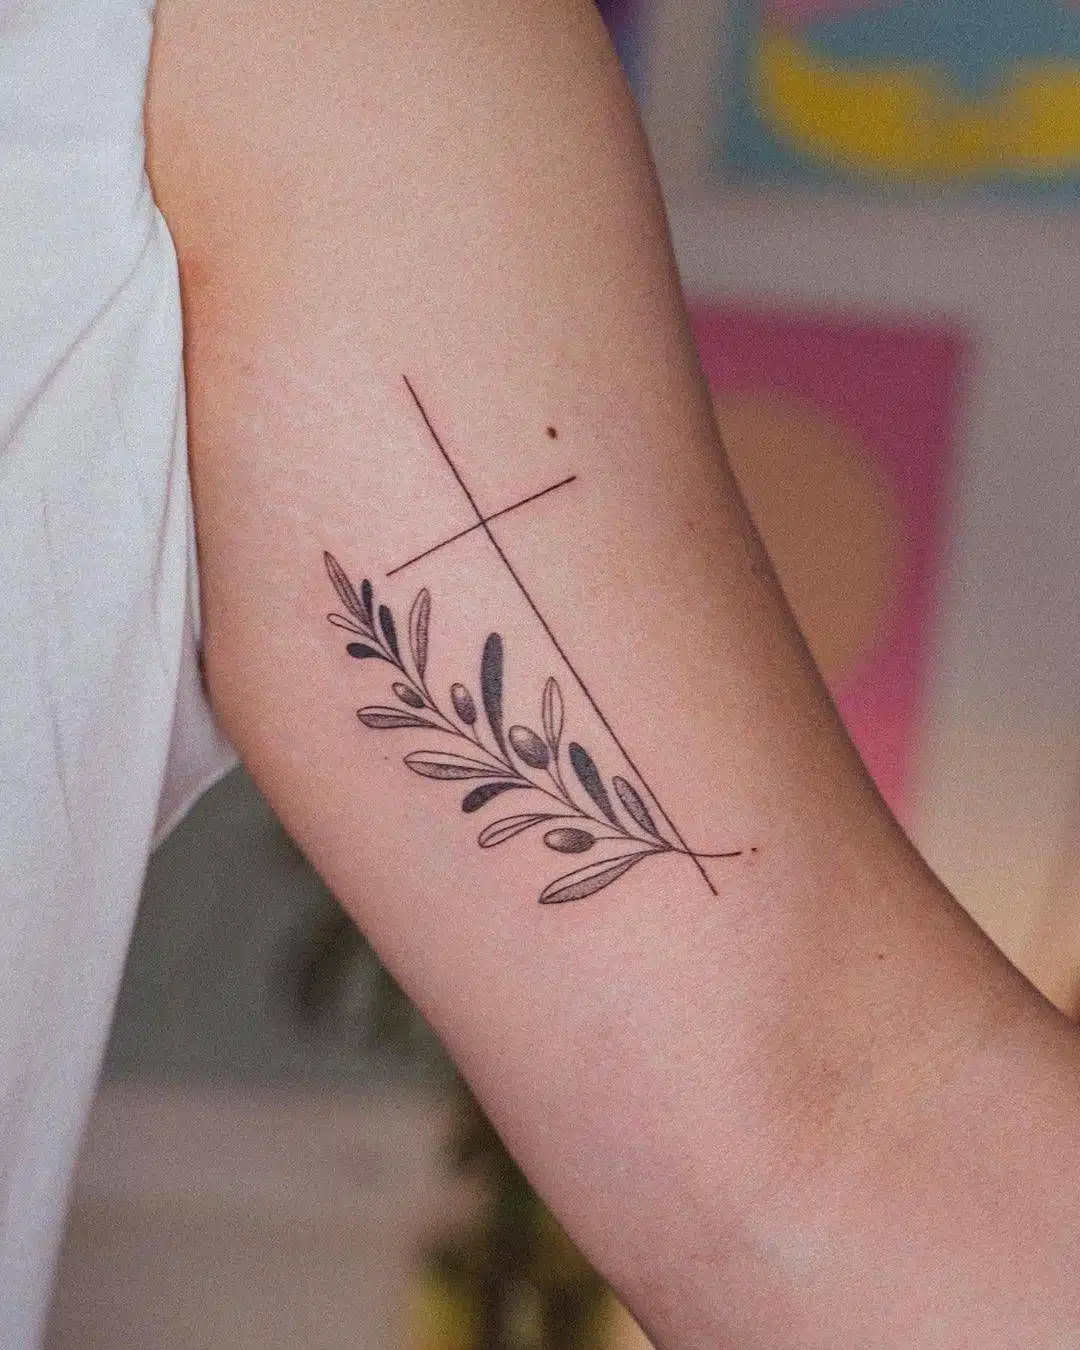 Cross and olive branch tattoo